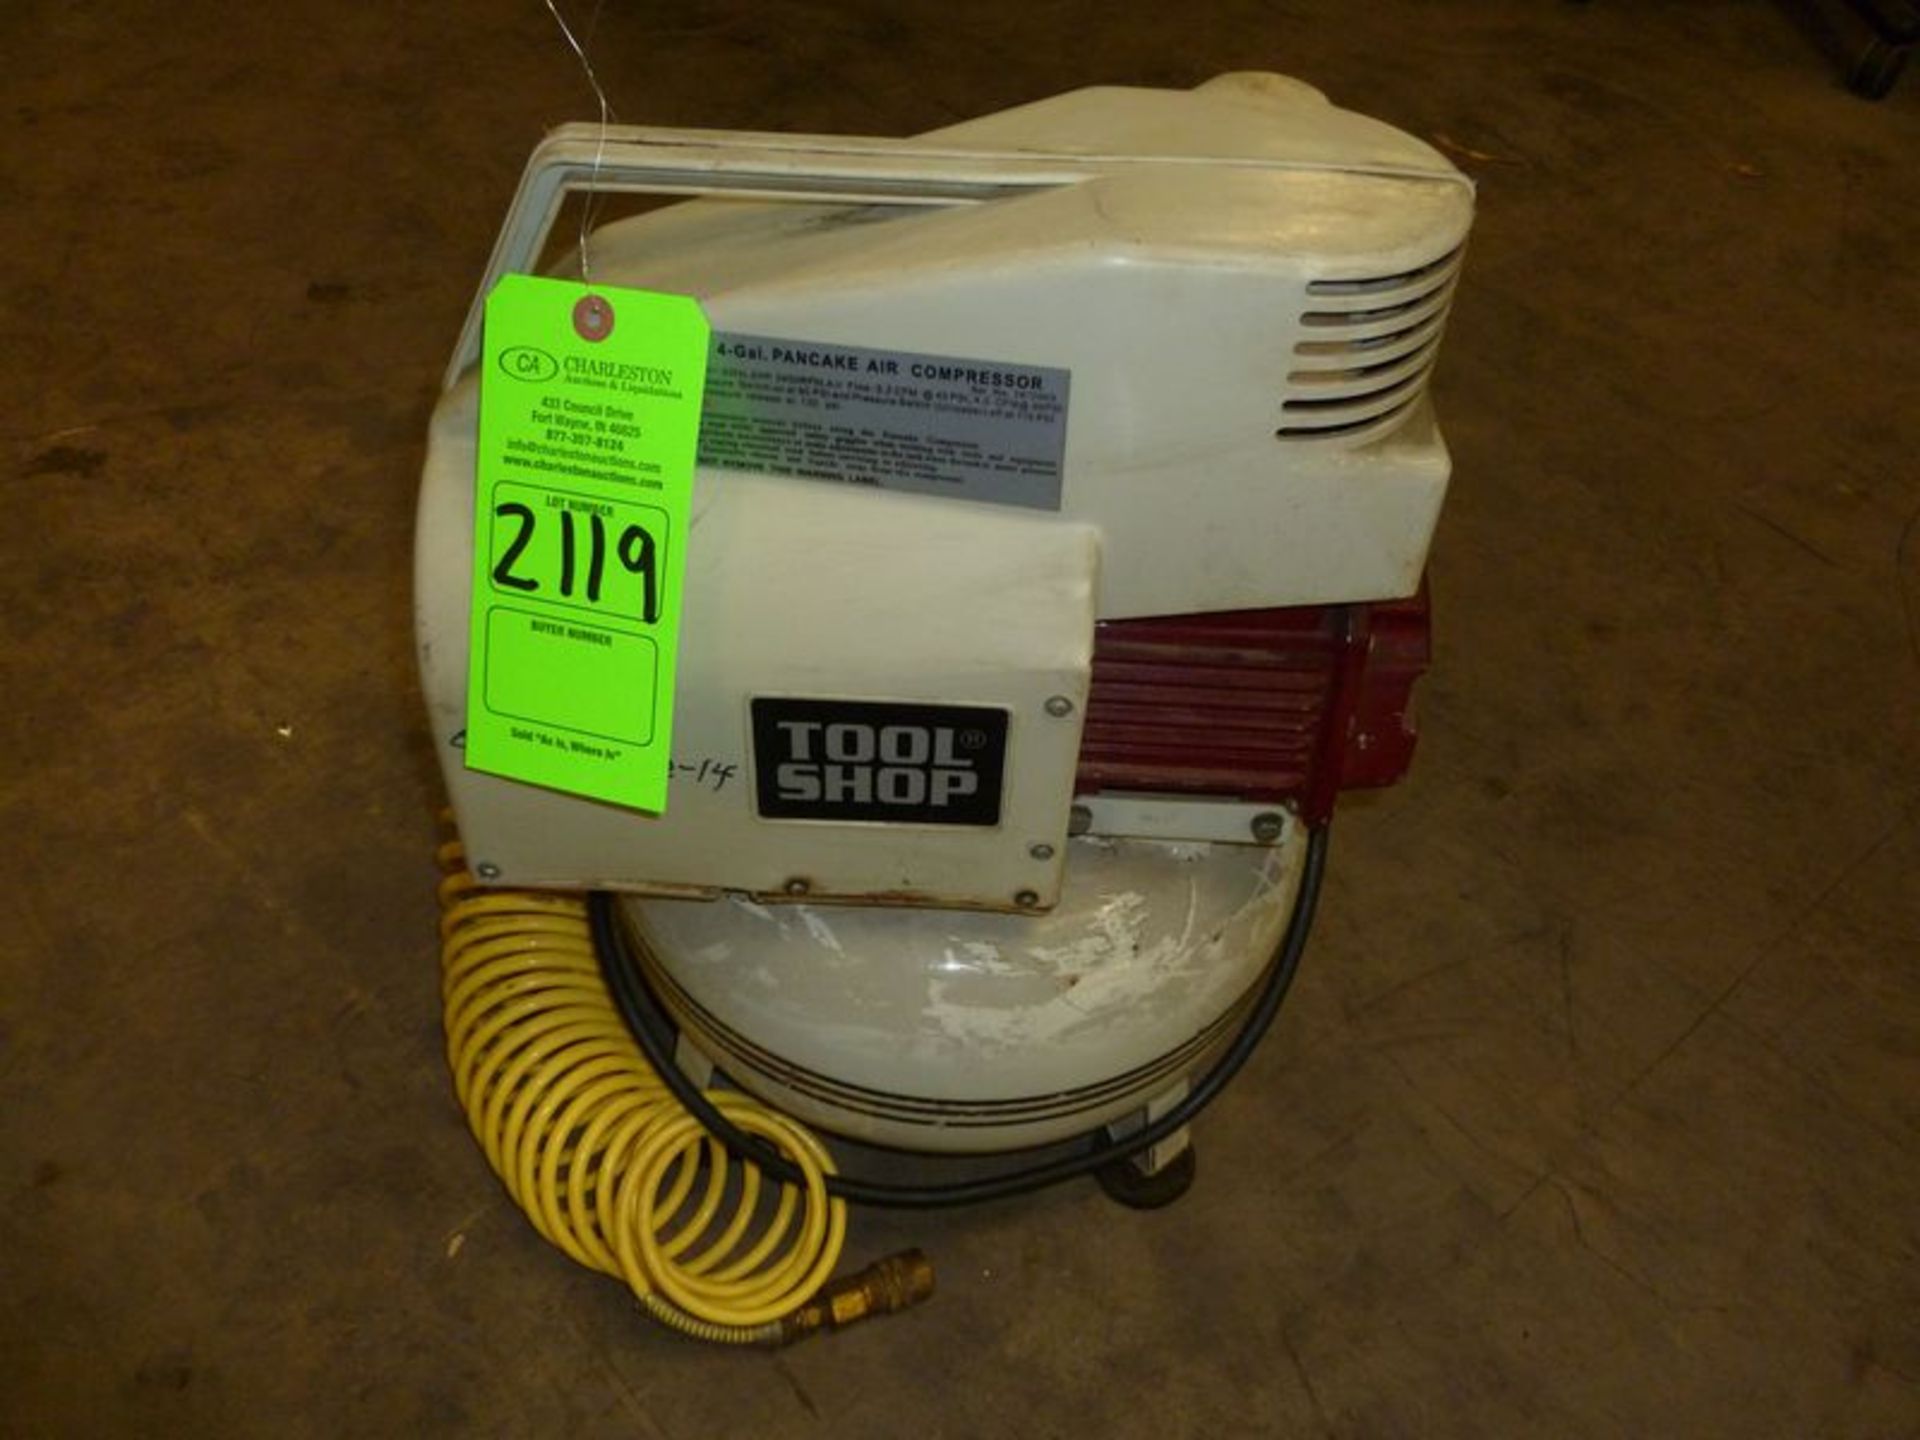 TOOL SHOP PANCAKE AIR COMPRESSOR 2 HP 4 GALLON (LOCATED AT 6901 ARDMORE AVE. FORT WAYNE, IN 46809) - Image 2 of 4